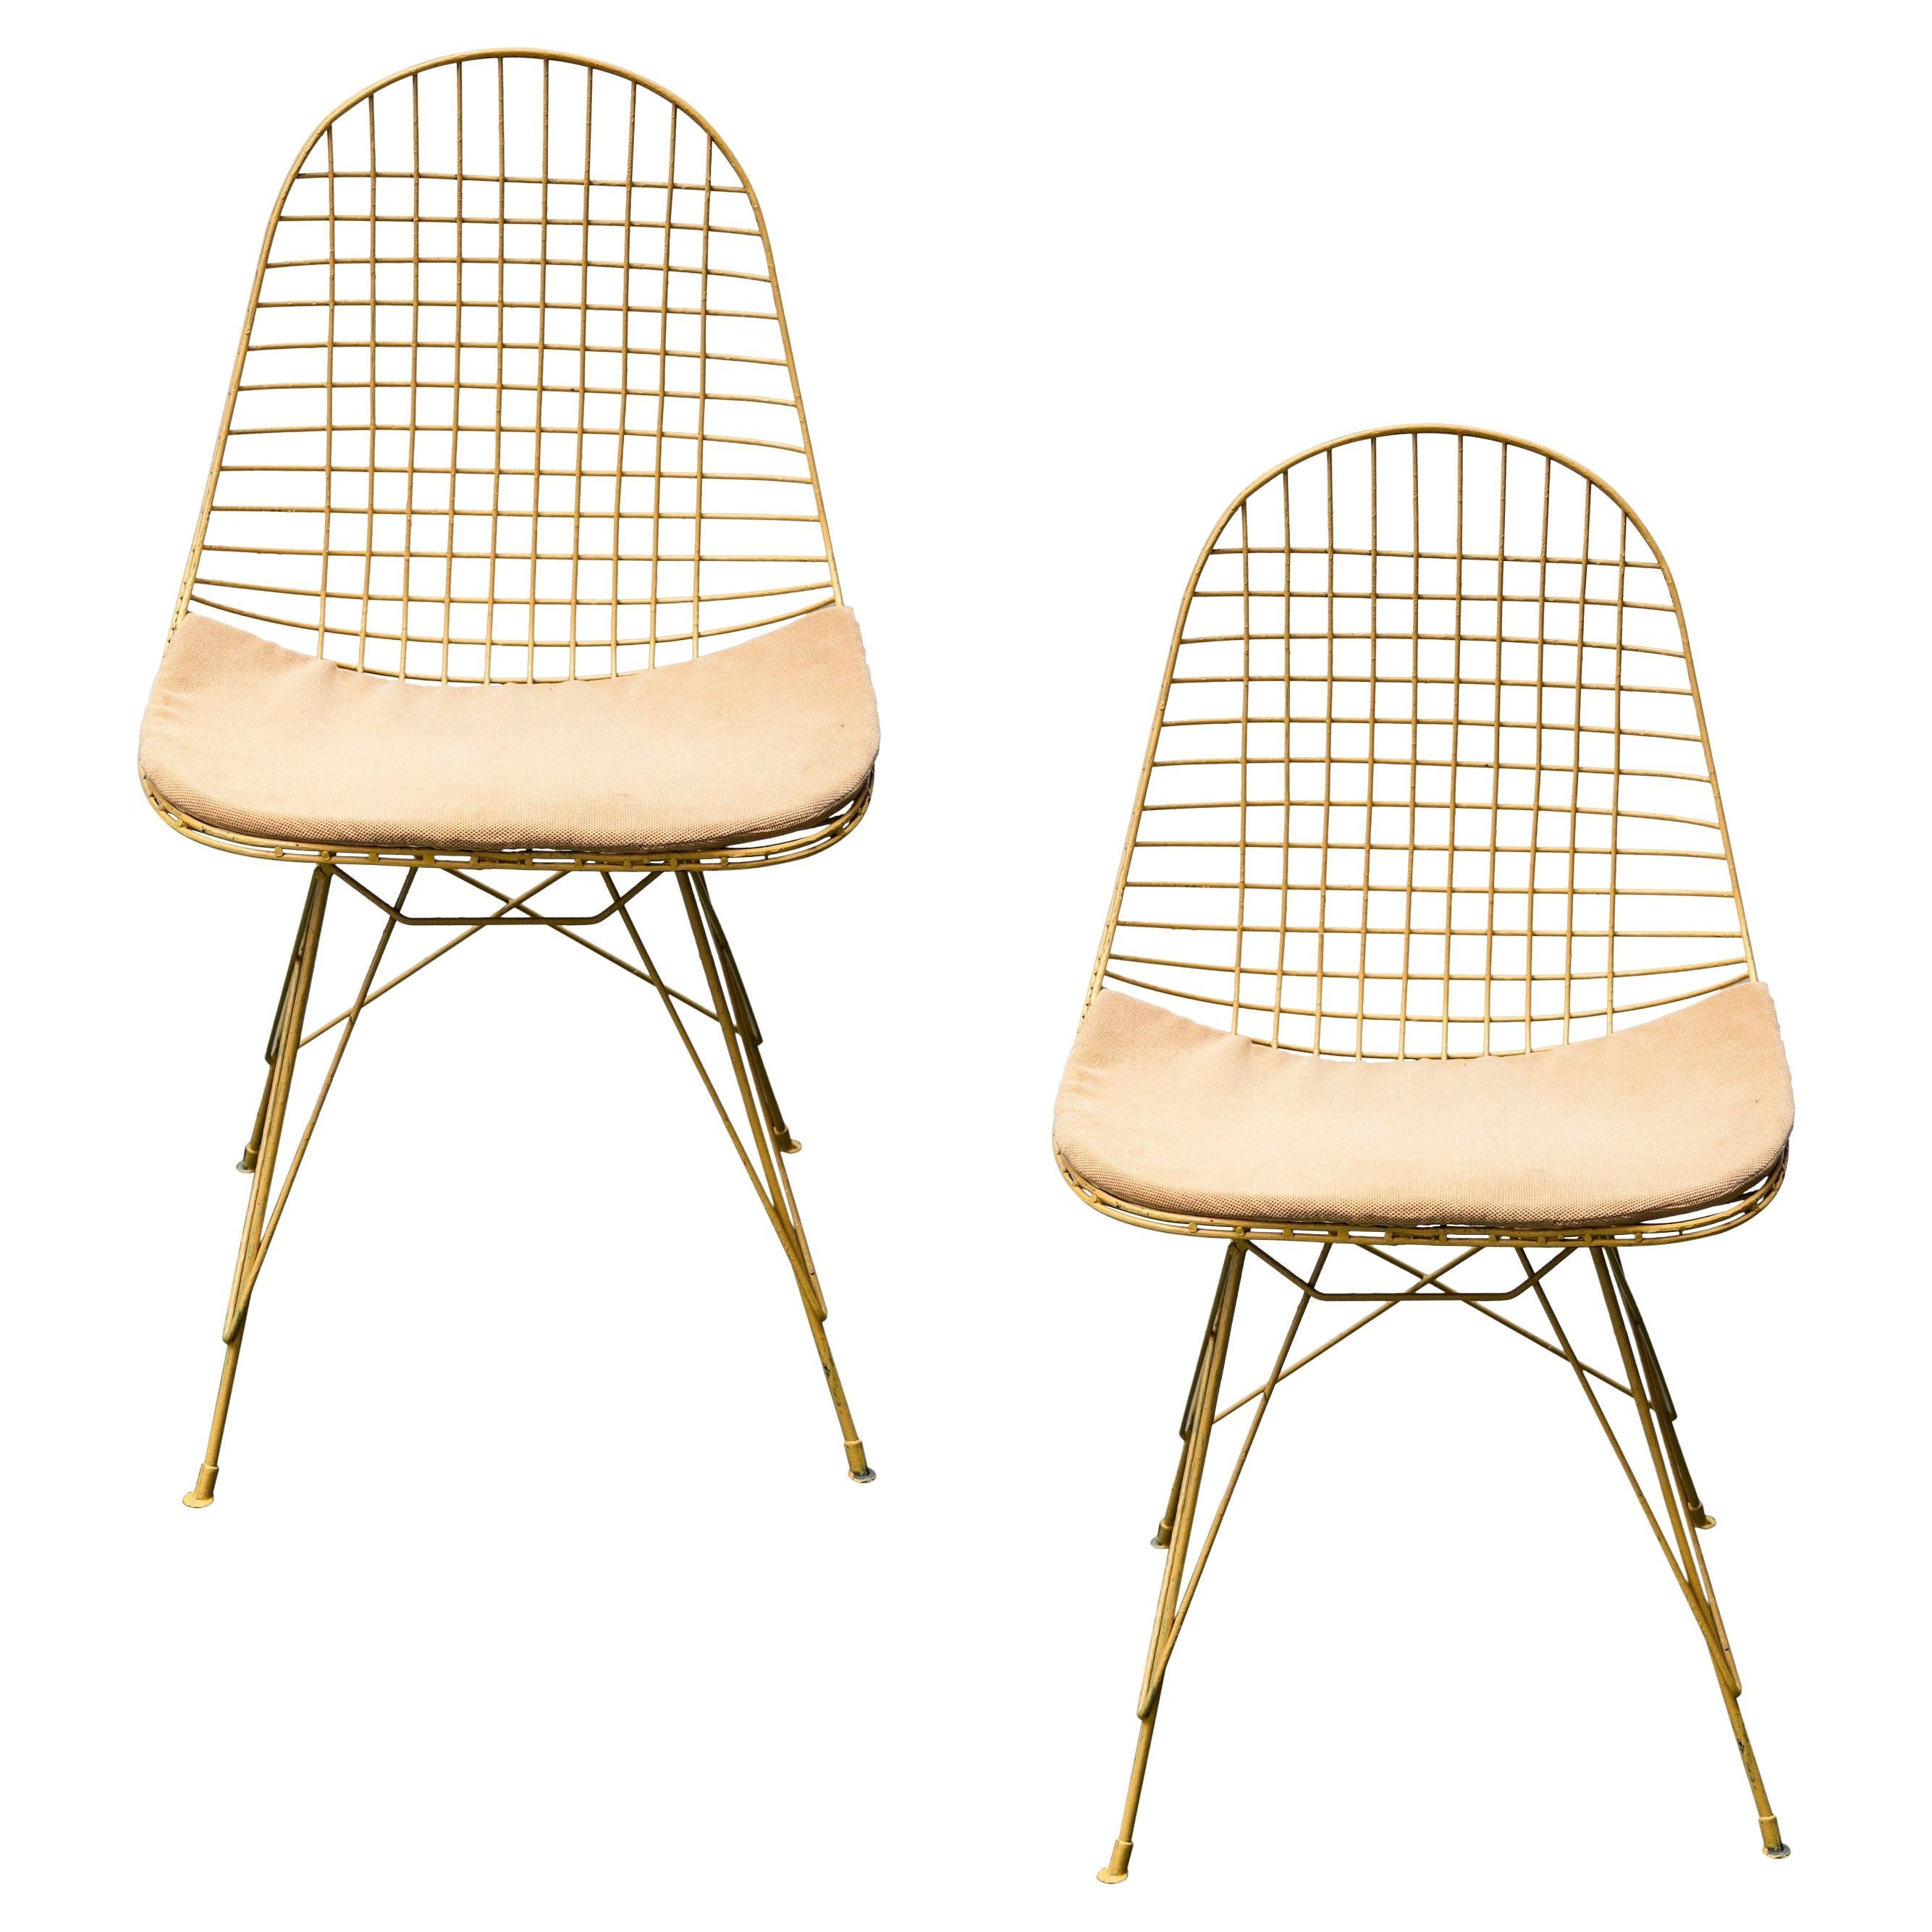 Pair of Chairs 1960, American